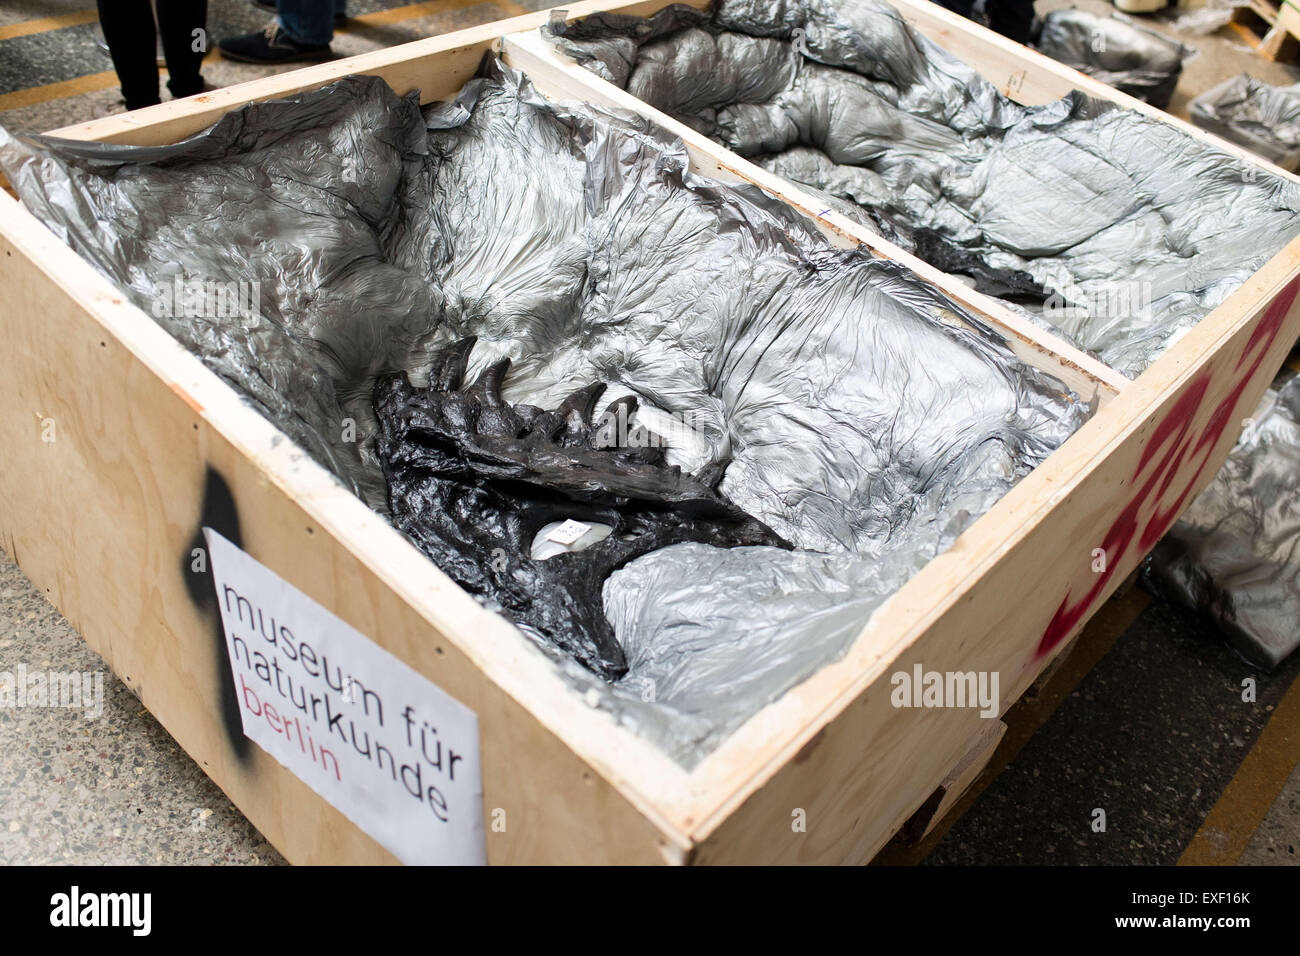 Berlin, Germany. 13th July, 2015. Parts of the lower jaw of a Tyrannosaurus rex named 'Tristan Otto' found in Montana, USA, are on display in a box during a press presenation at the Museum of Natural History in Berlin, Germany, 13 July 2015. The skull is the first part of the dinosaur that was shipped to Germany to be examined and showcased in an exhibition for three years from December 2015 on. Photo: GREGOR FISCHER/dpa/Alamy Live News Stock Photo